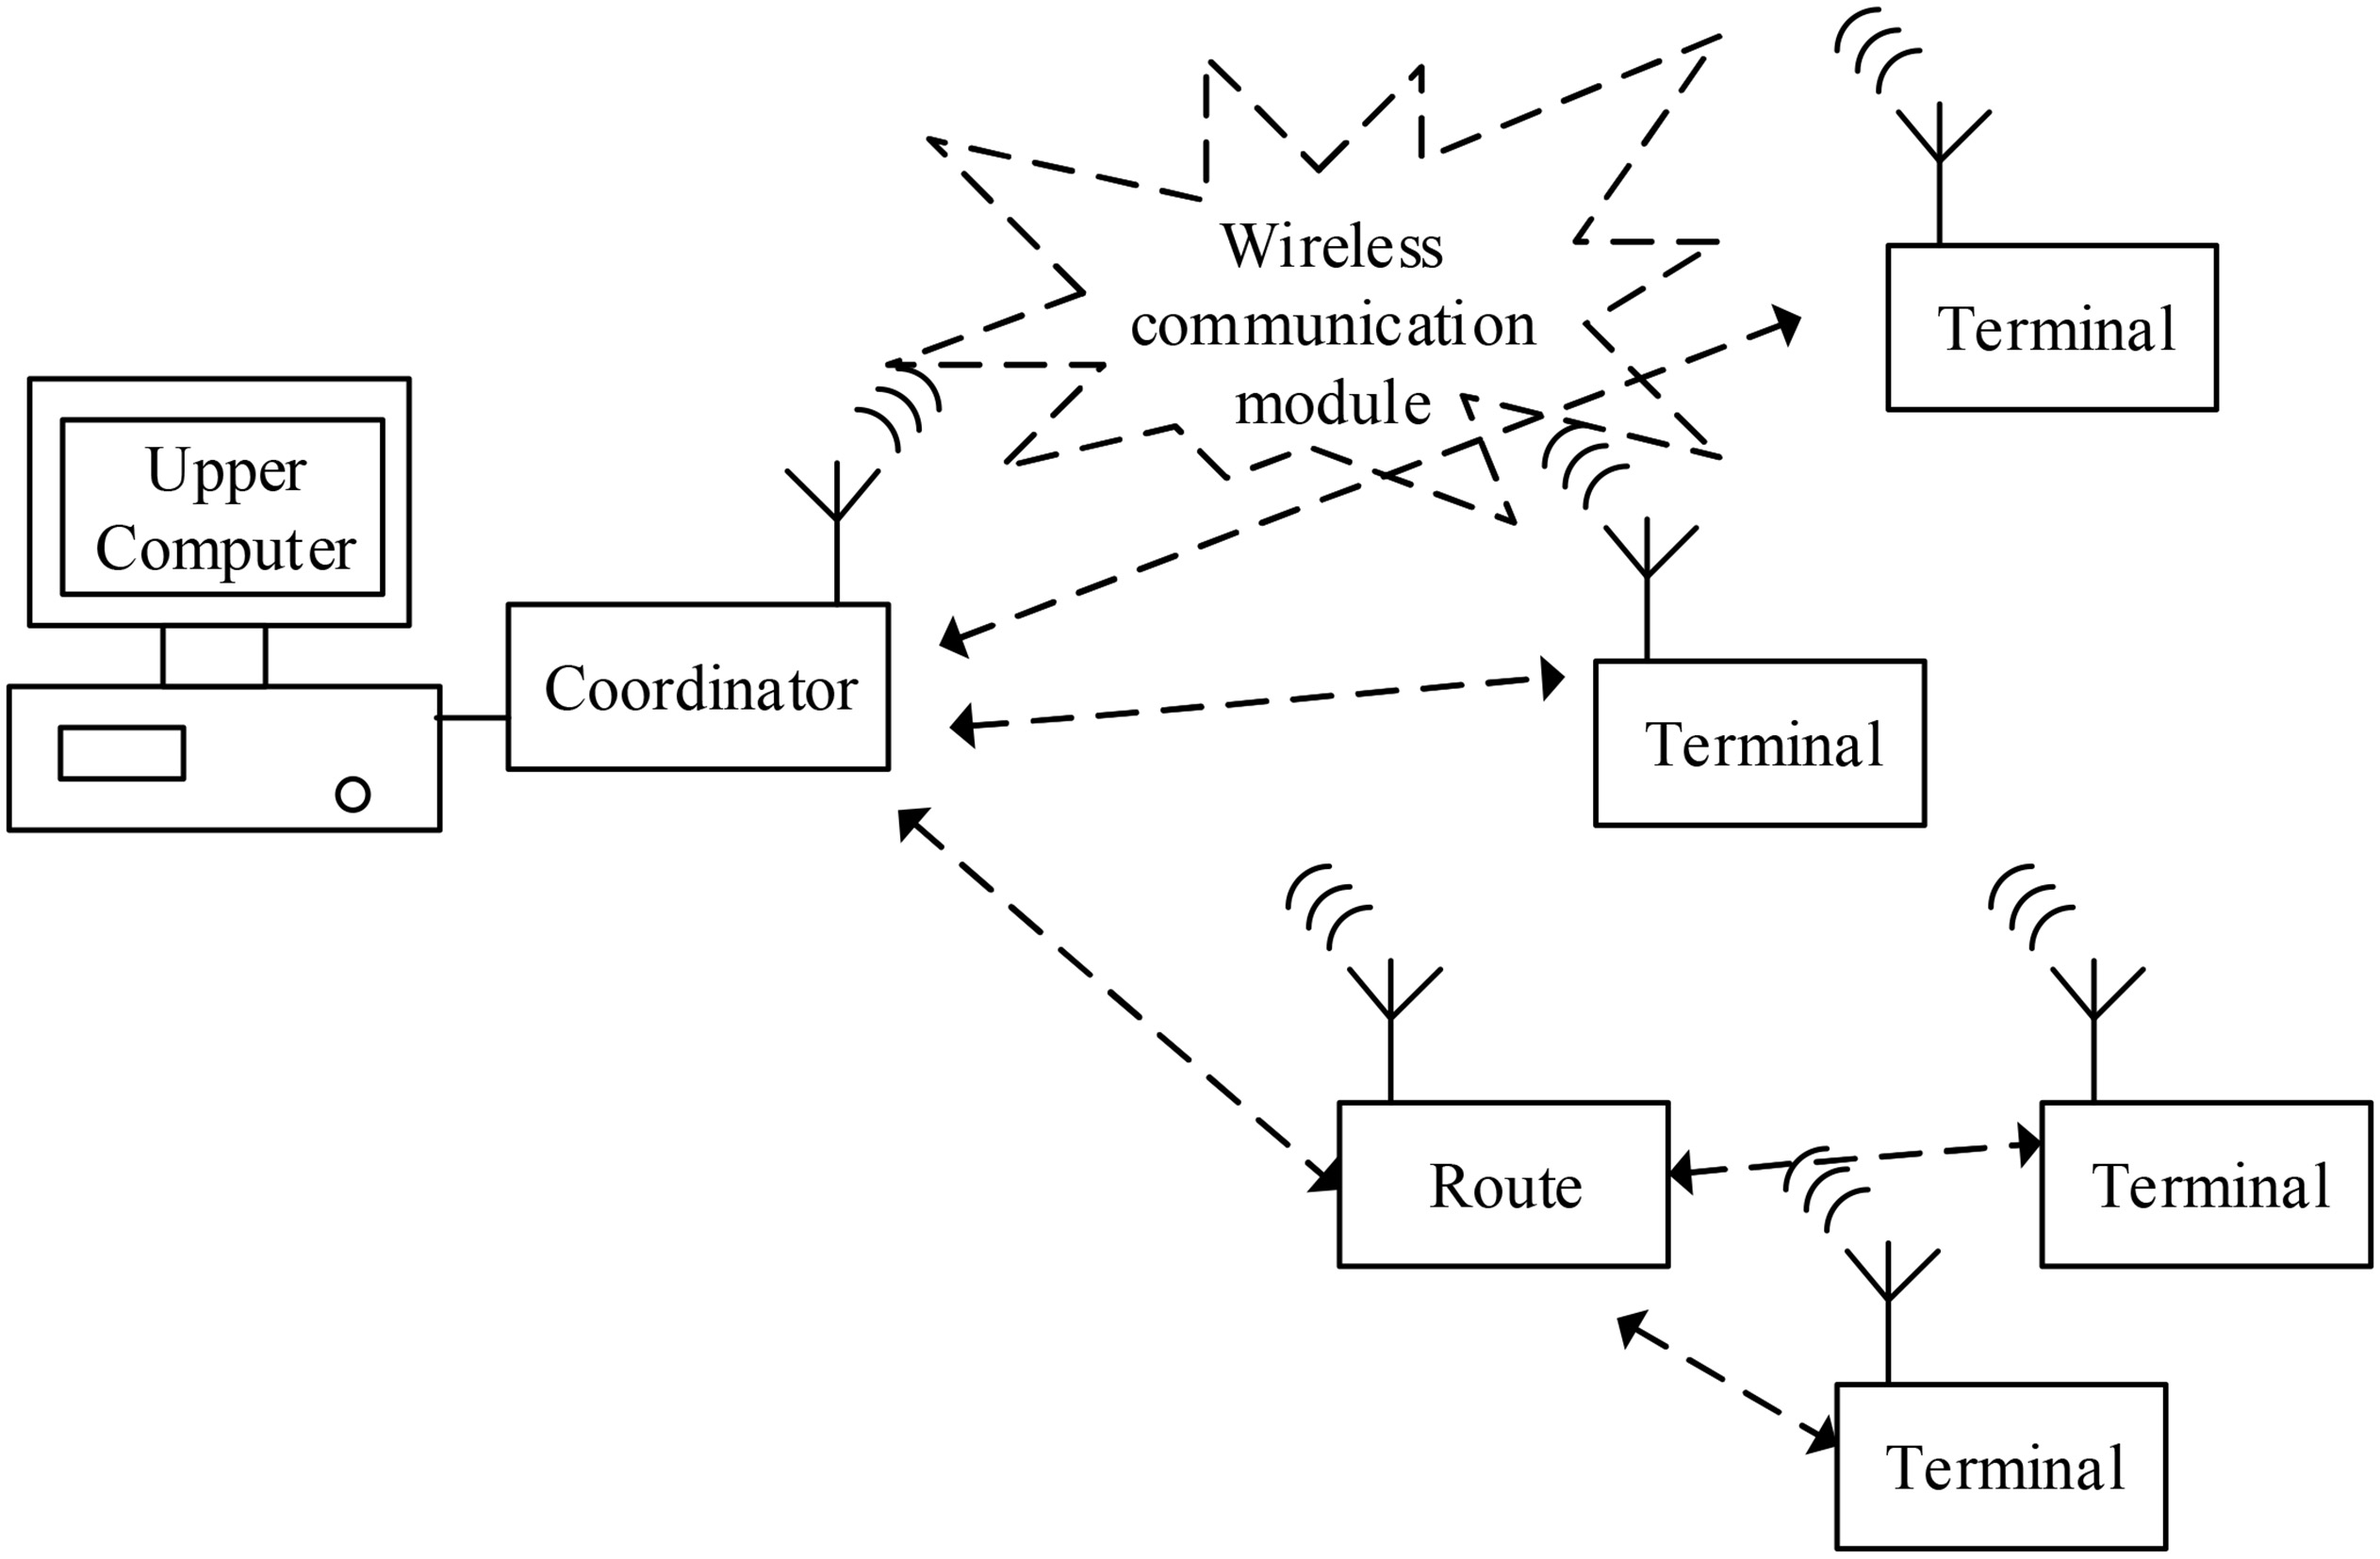 The remote wireless infusion monitoring system networking framework.